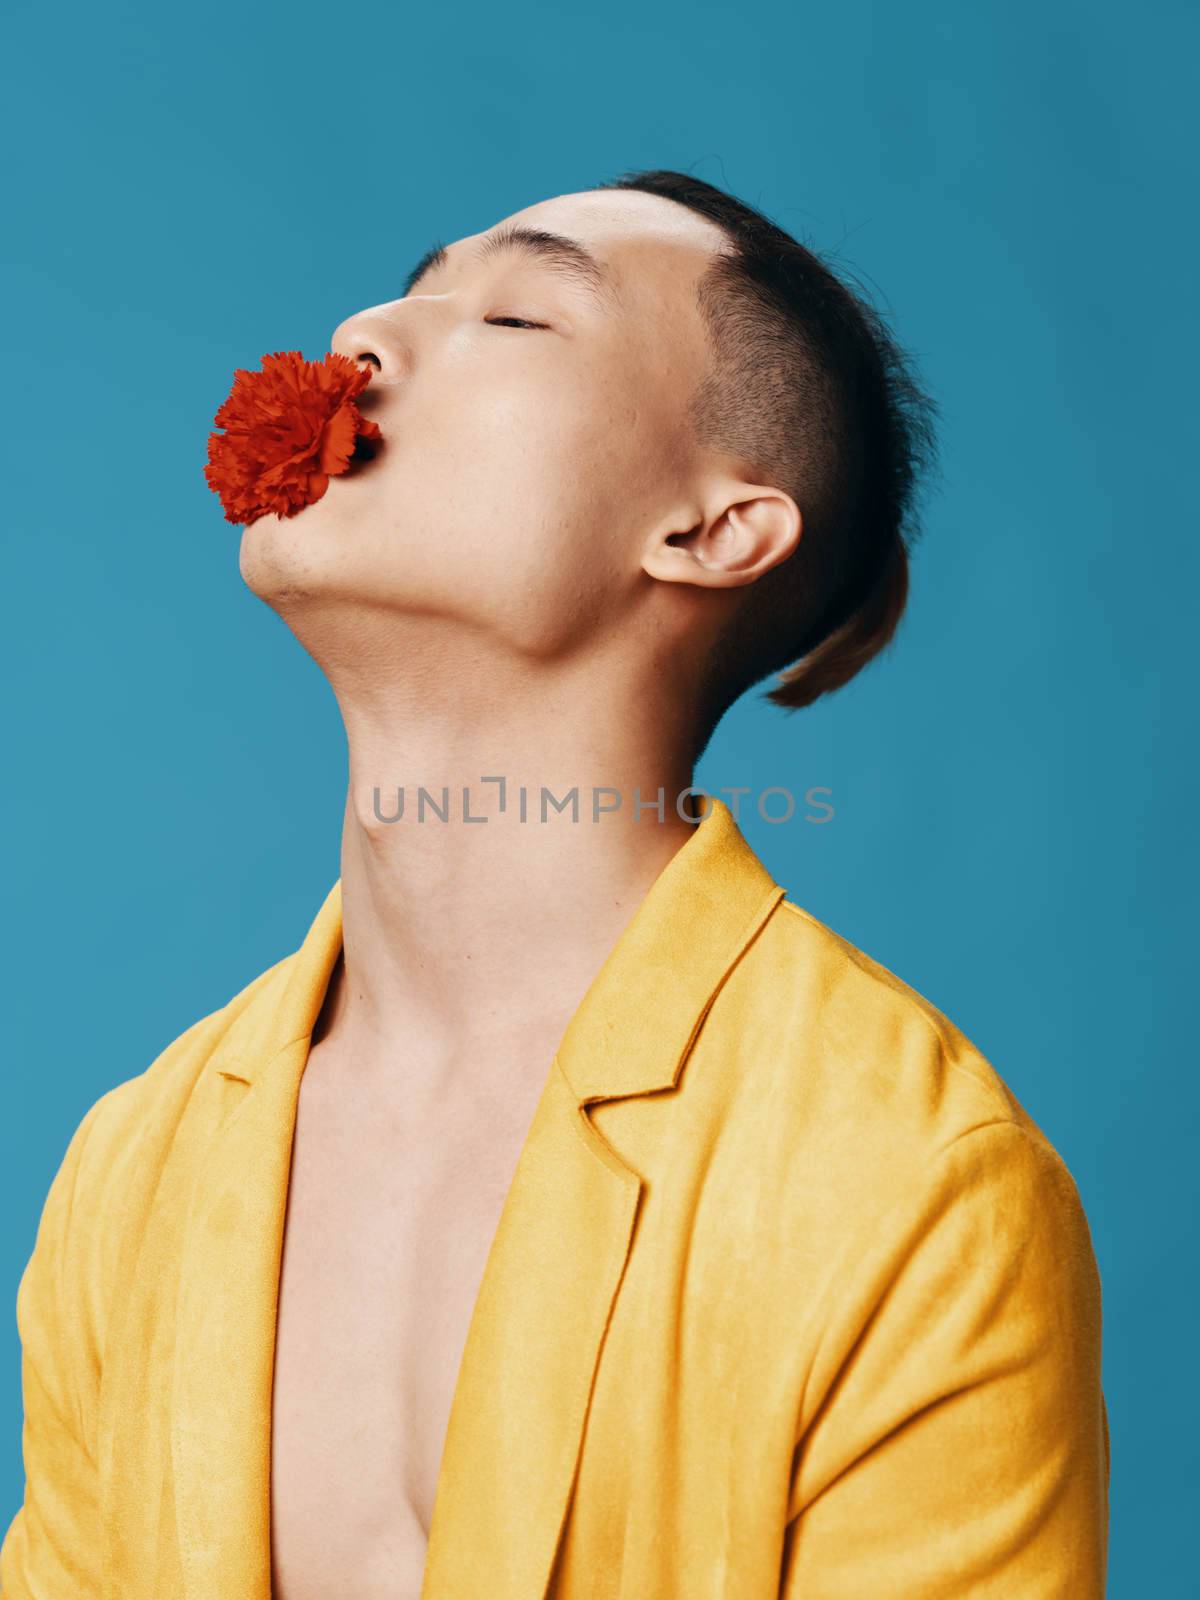 A handsome Asian man with a red flower in his mouth tilted his head back side view Copy Space close-up. High quality photo